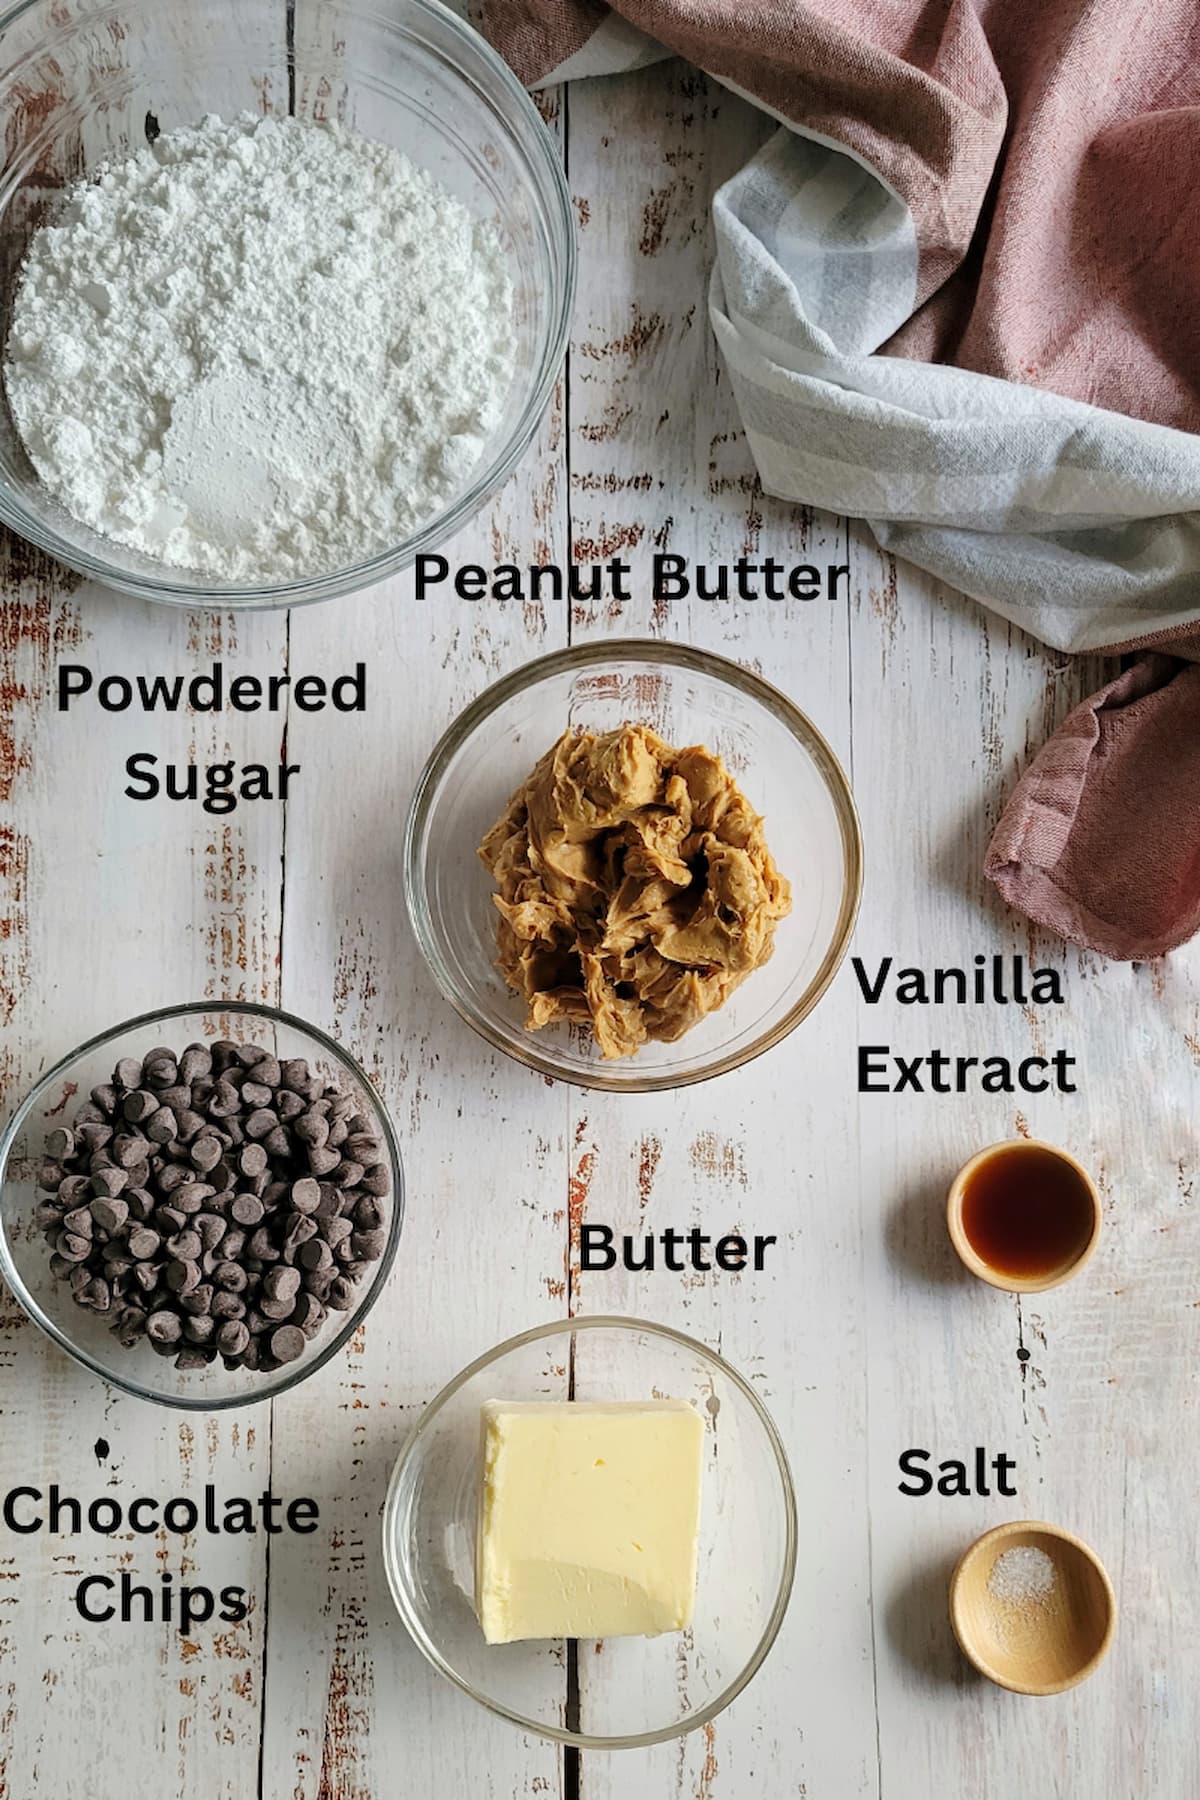 ingredients for peanut butter balls with butter - peanut butter, butter, powdered sugar, chocolate chips, vanilla extract, salt